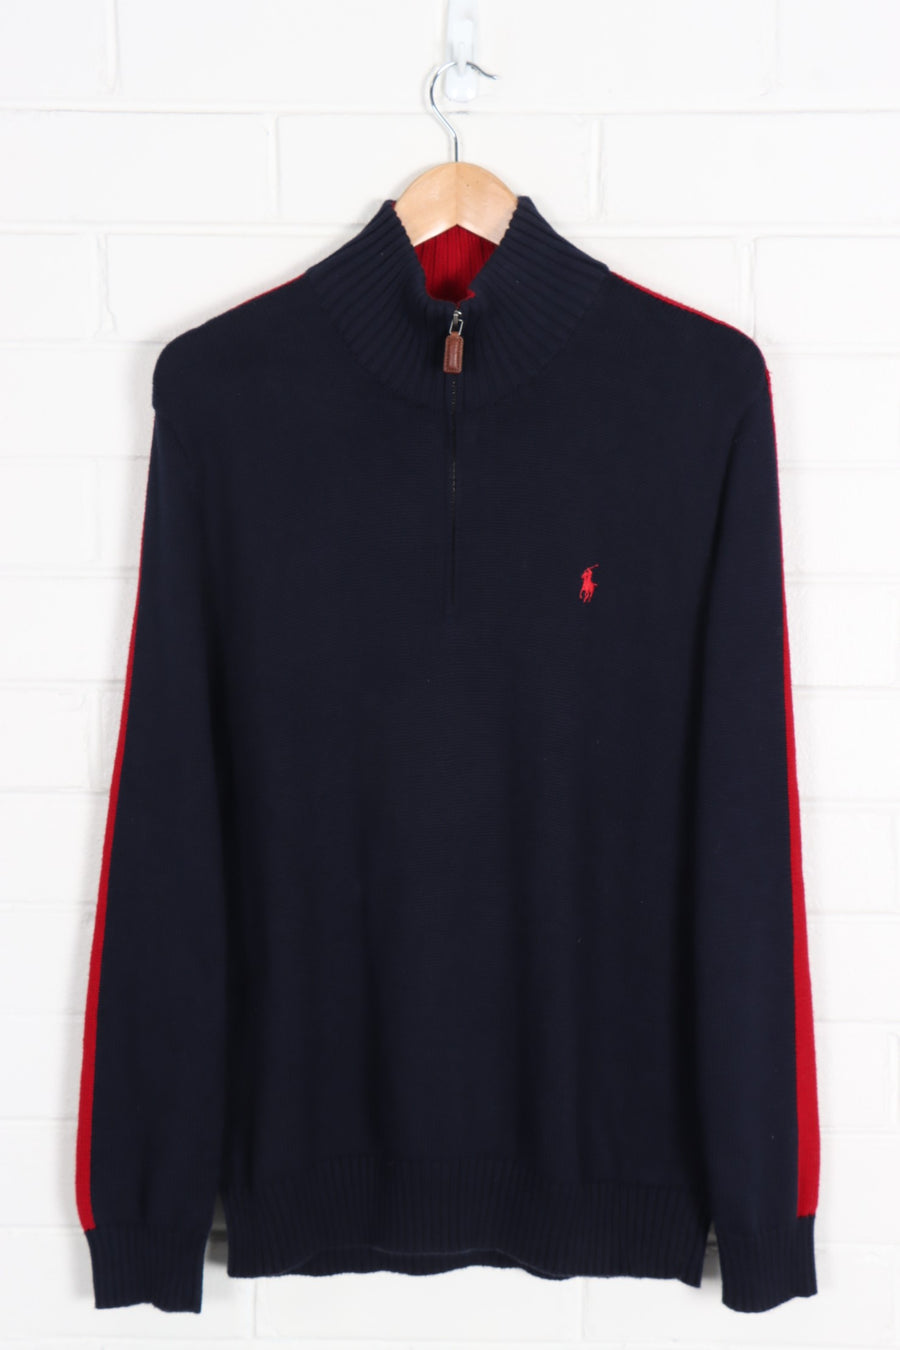 POLO RALPH LAUREN Navy & Red Embroidered 1/4 Zip Sweater Knit (M)